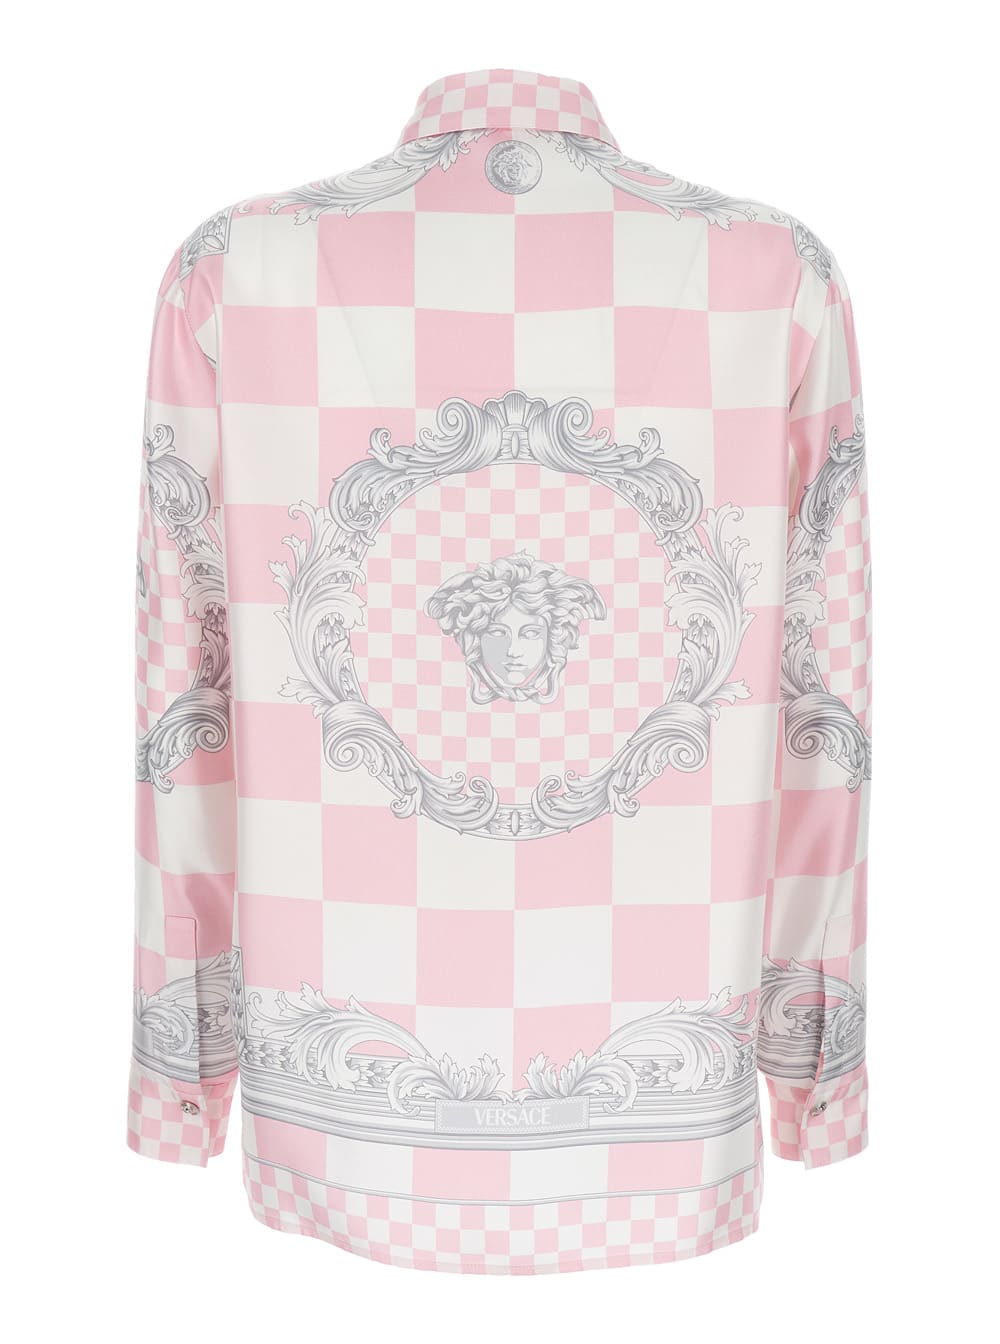 VERSACE PINK SHIRT WITH BAROQUE PRINT IN SATIN WOMAN